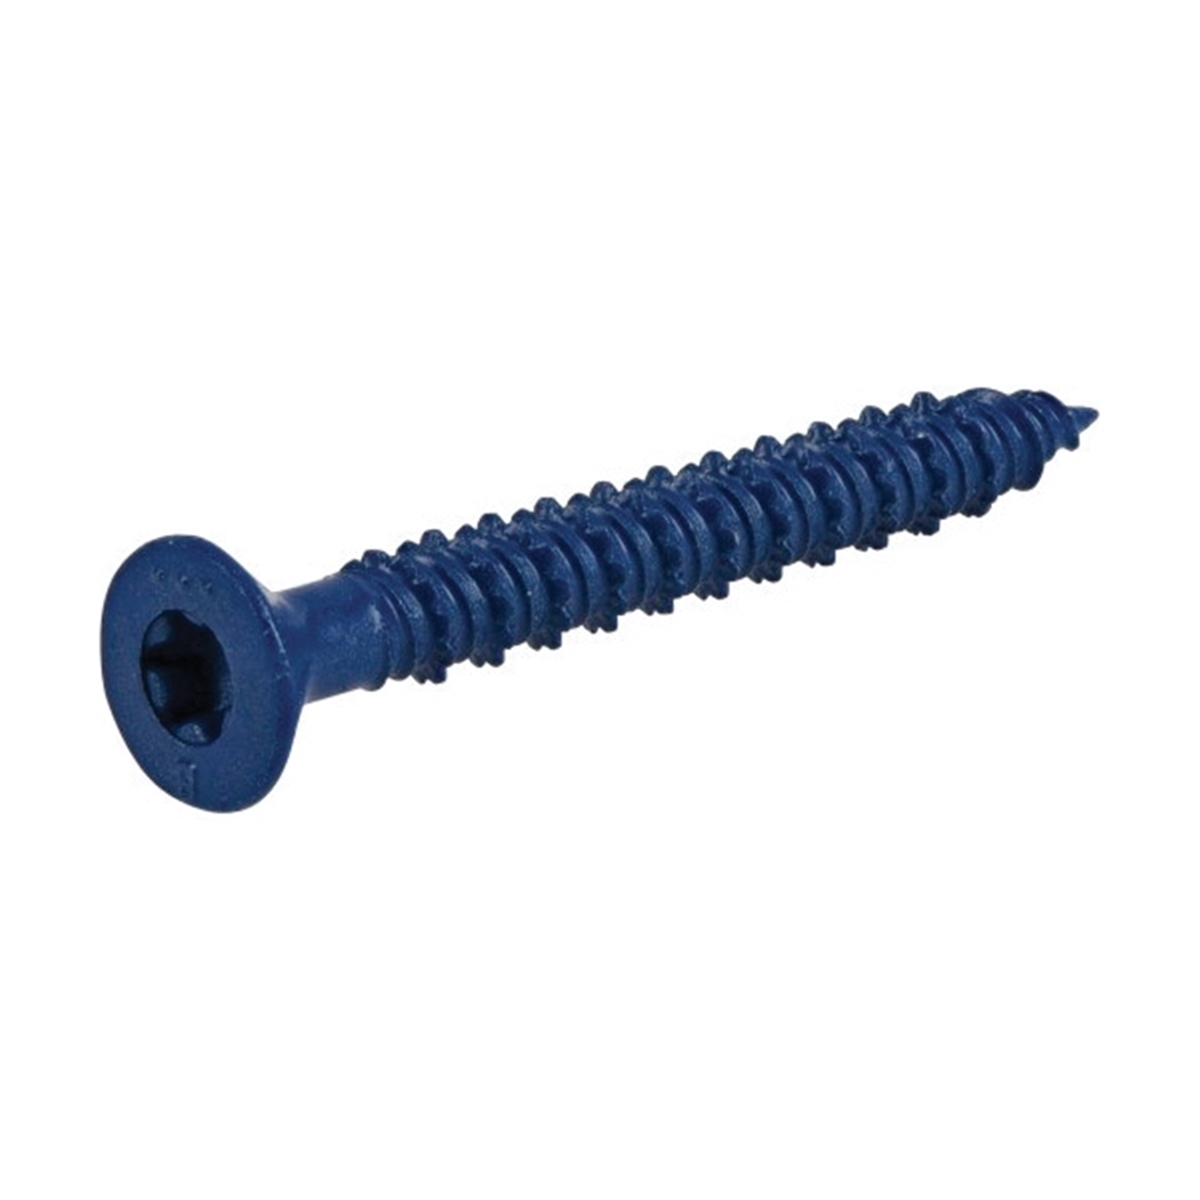 376532 Concrete Screw Anchor, 1/4 in Dia, 2-1/4 in L, Carbon Steel, Epoxy-Coated, 100/PK